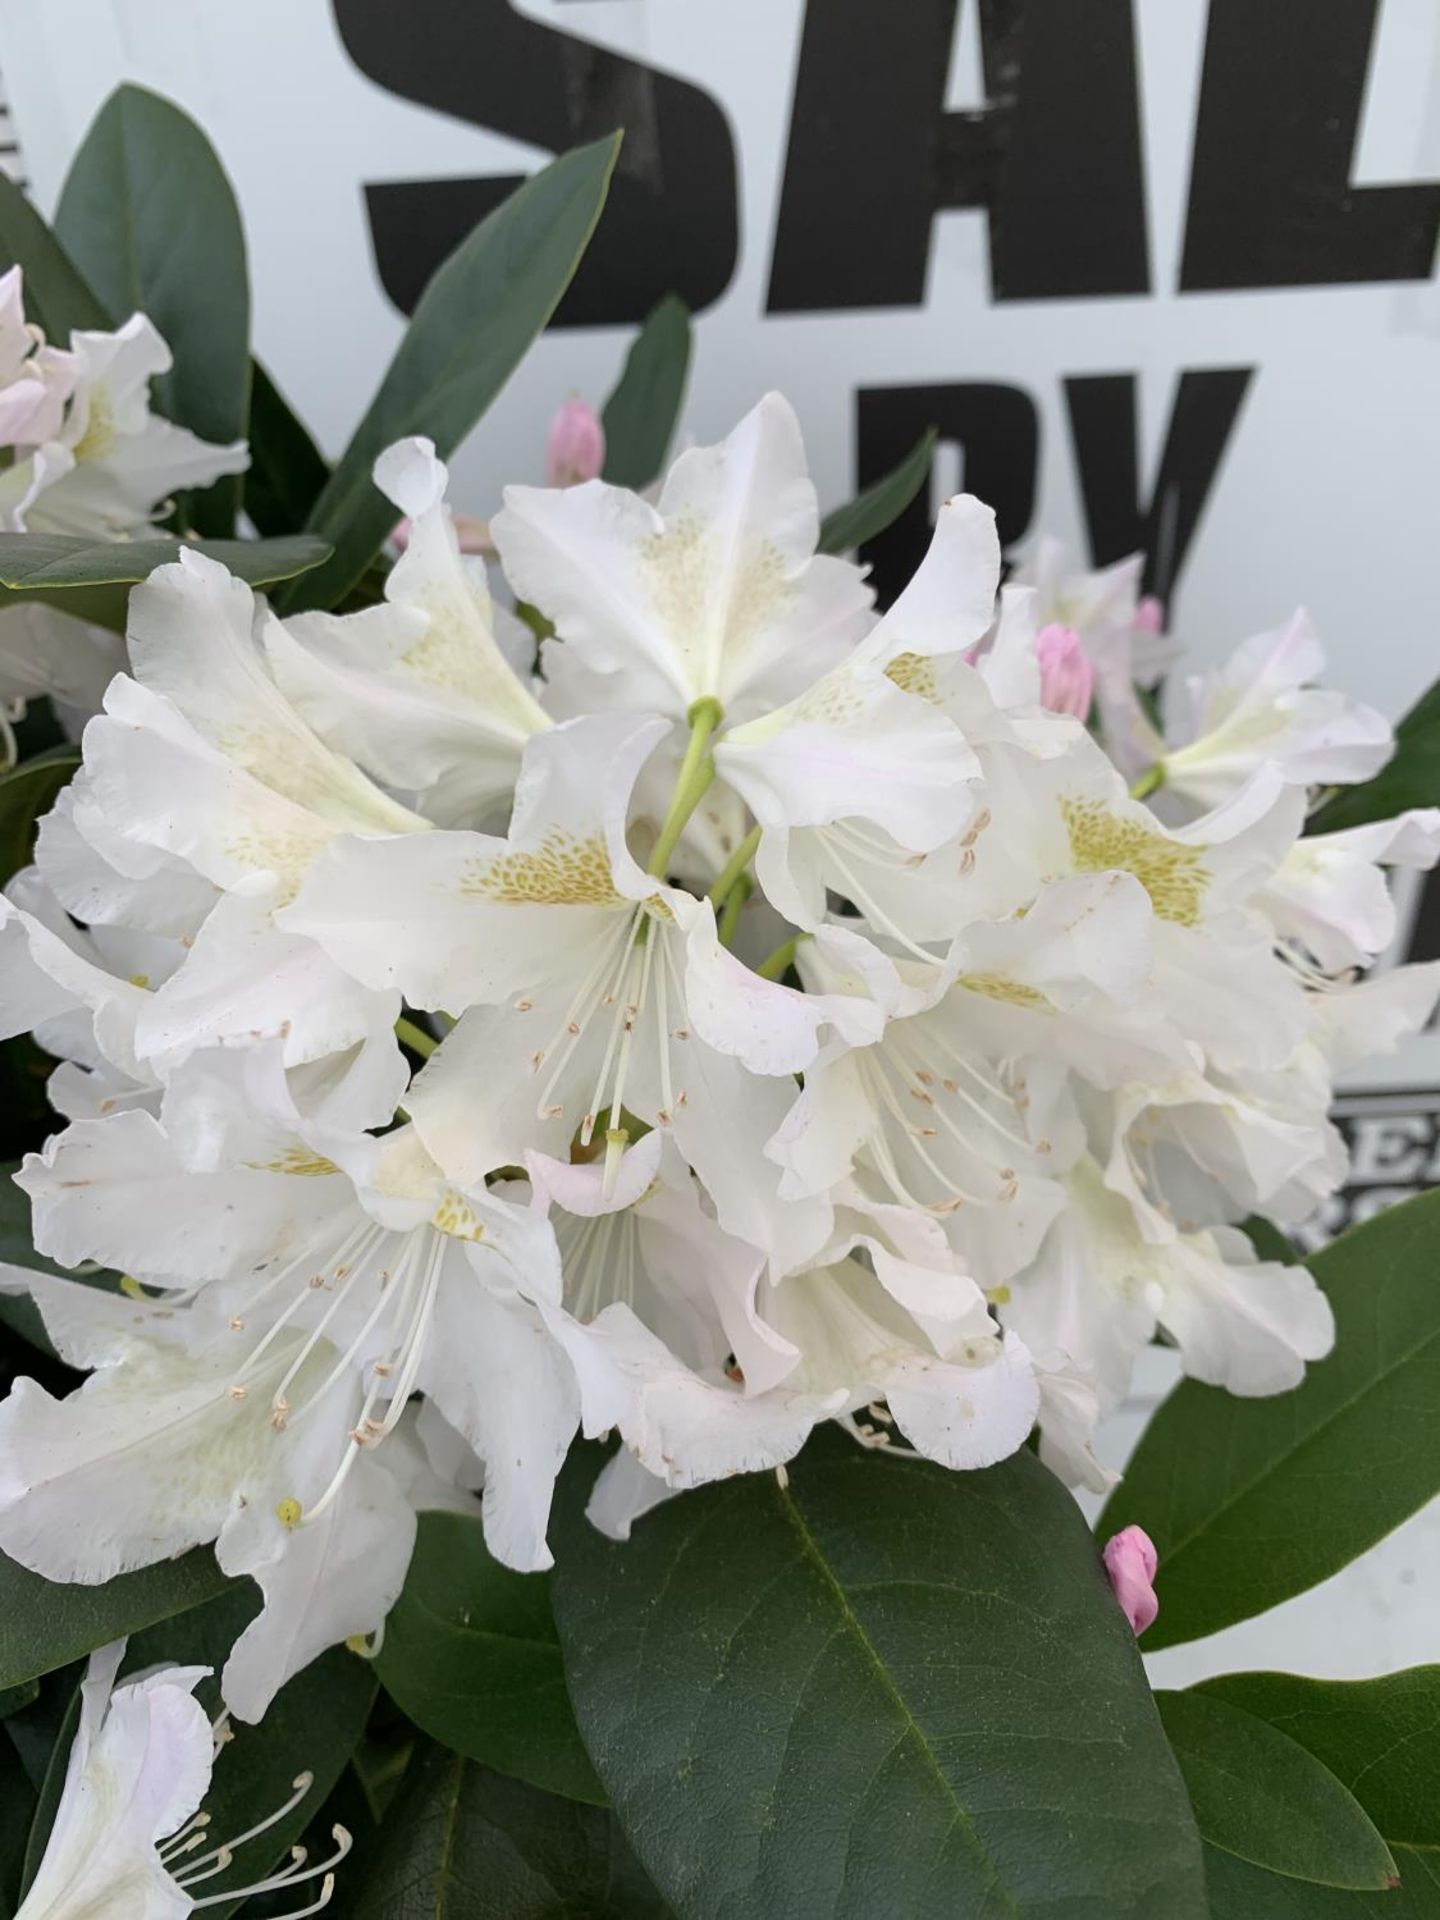 TWO LARGE RHODODENDRONS CUNNINGHAM'S WHITE IN 7.5 LTR POTS APPROX 70CM IN HEIGHT PLUS VAT TO BE SOLD - Image 5 of 6